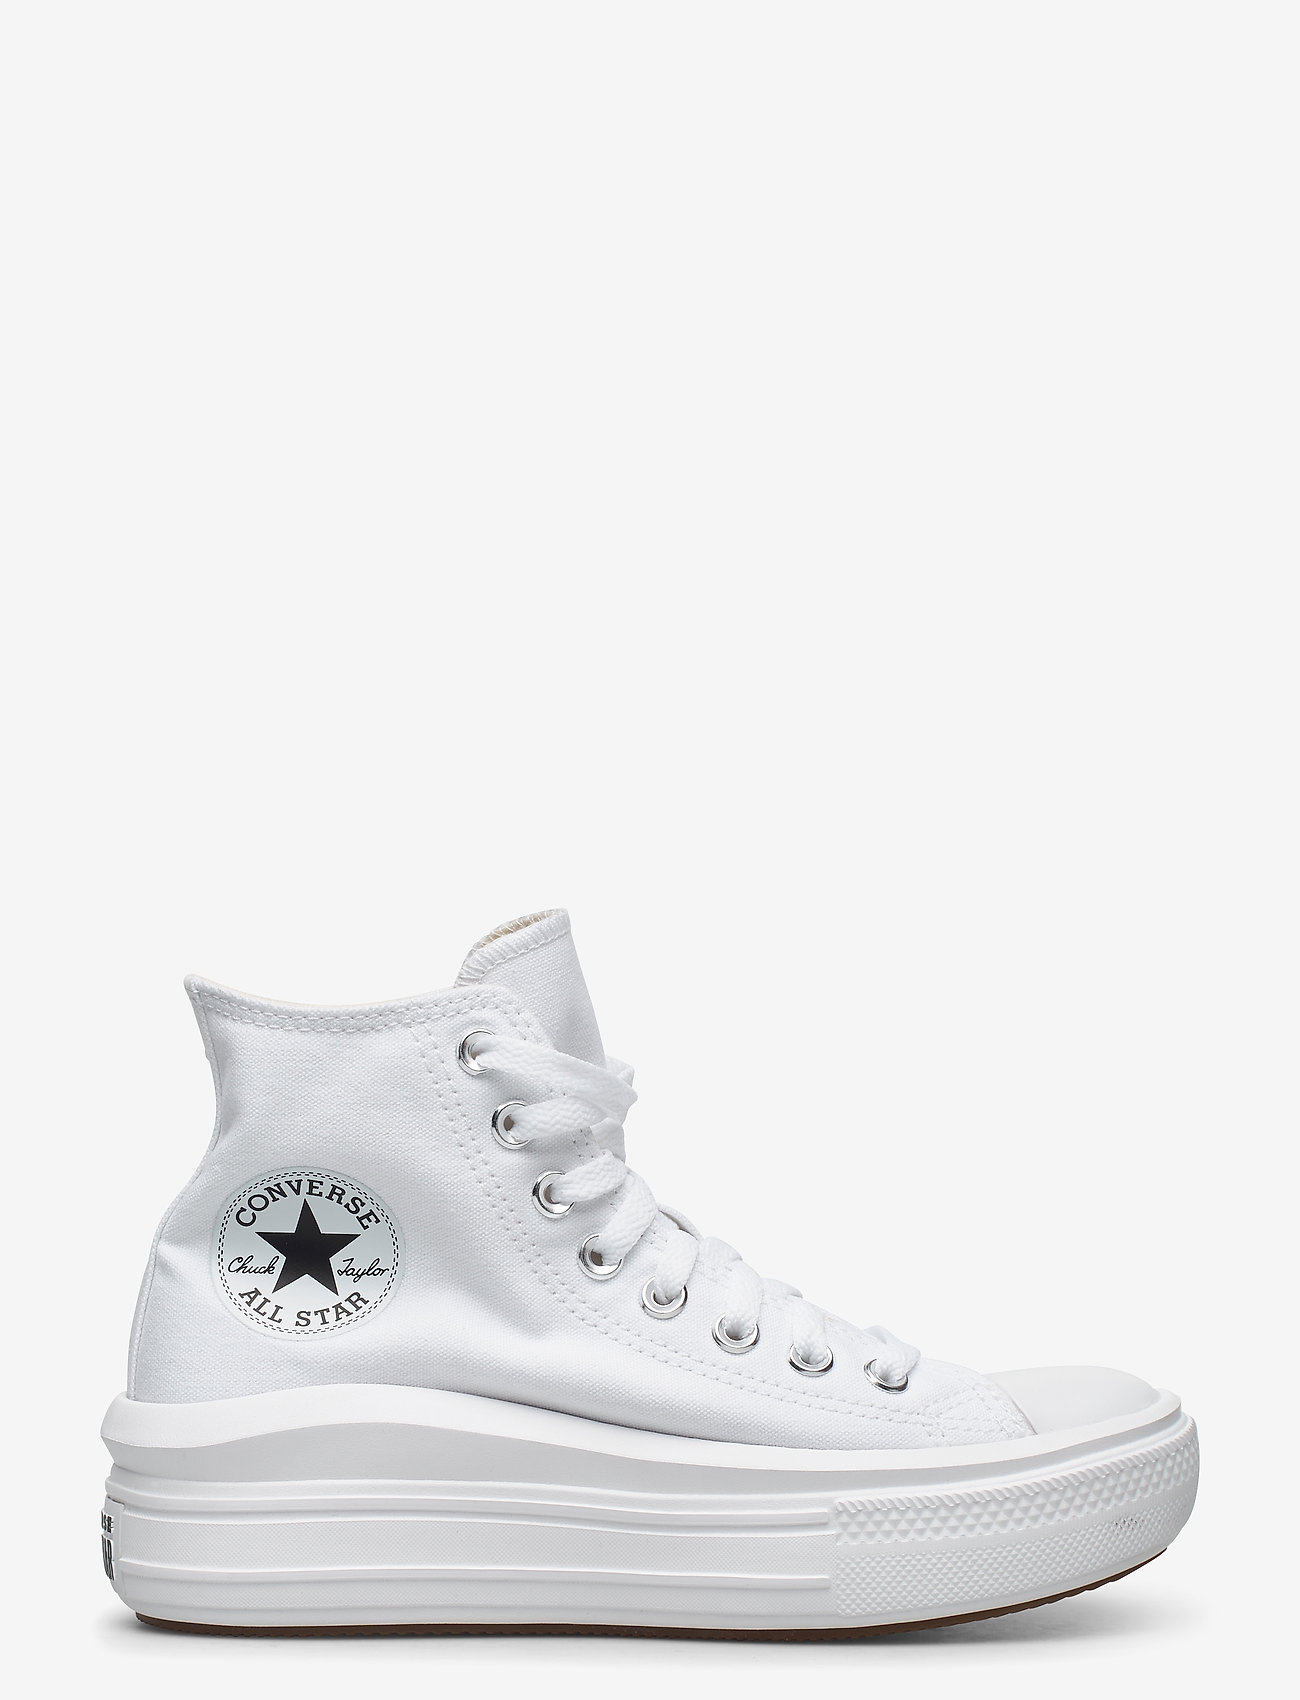 Converse Chuck Taylor All Star Move - High top sneakers | Boozt.com